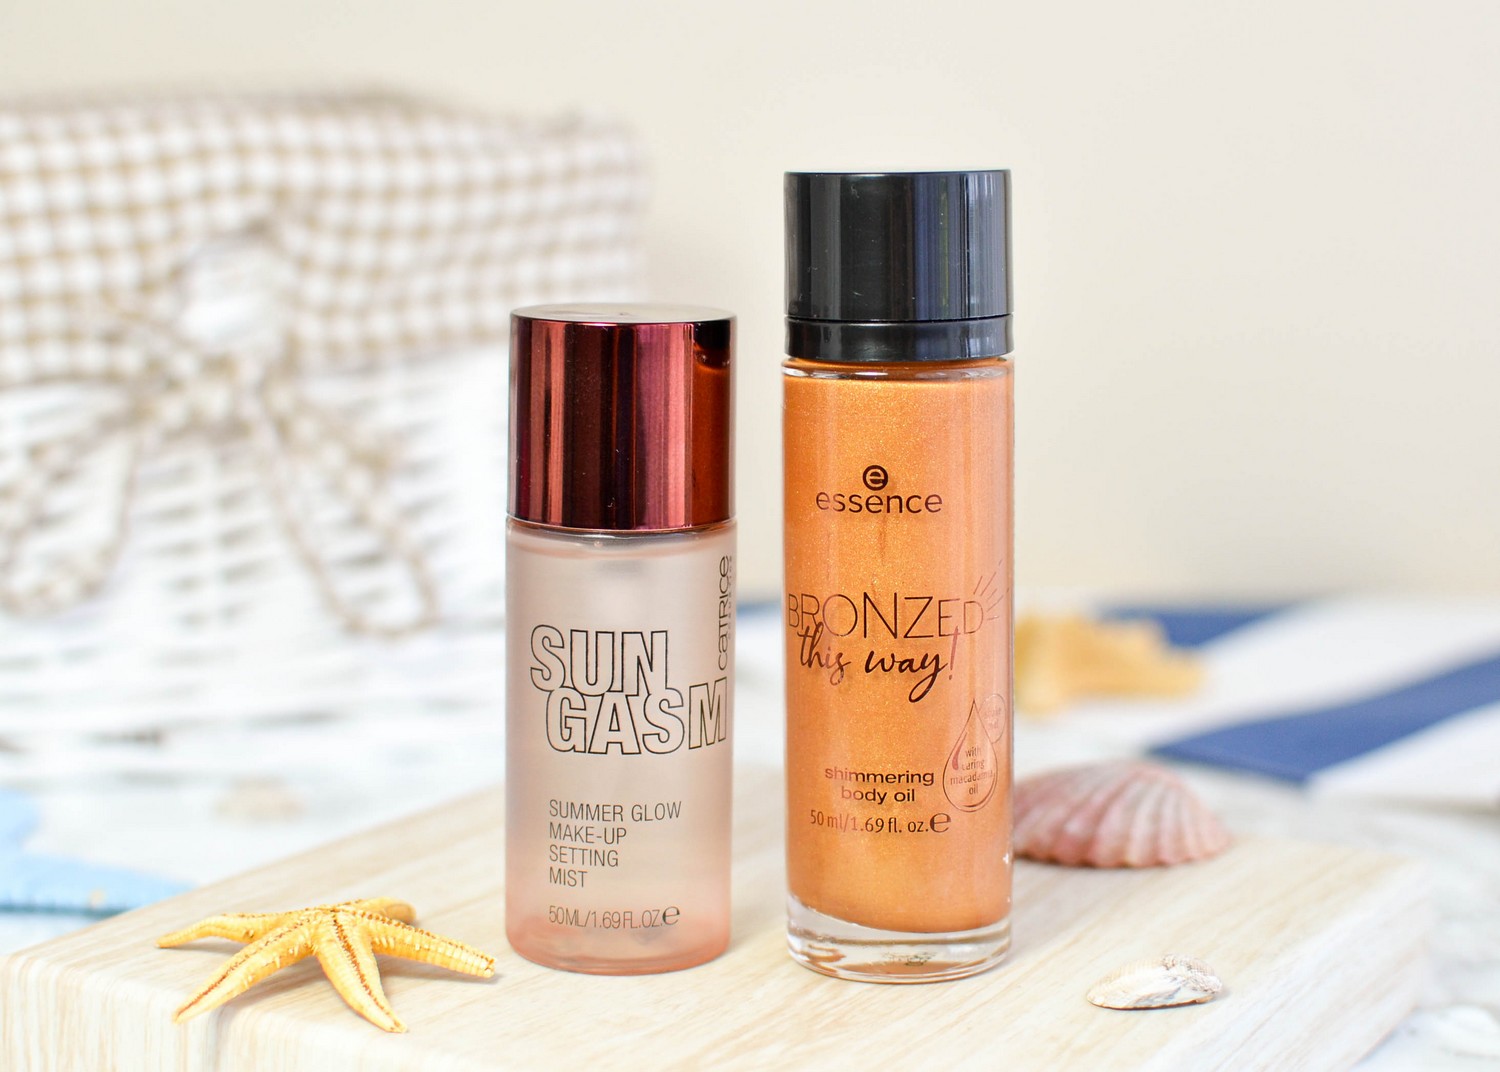 Catrice Sungasm LE Setting Spray and Essence Bronzed This Way! Shimmering Body Oil